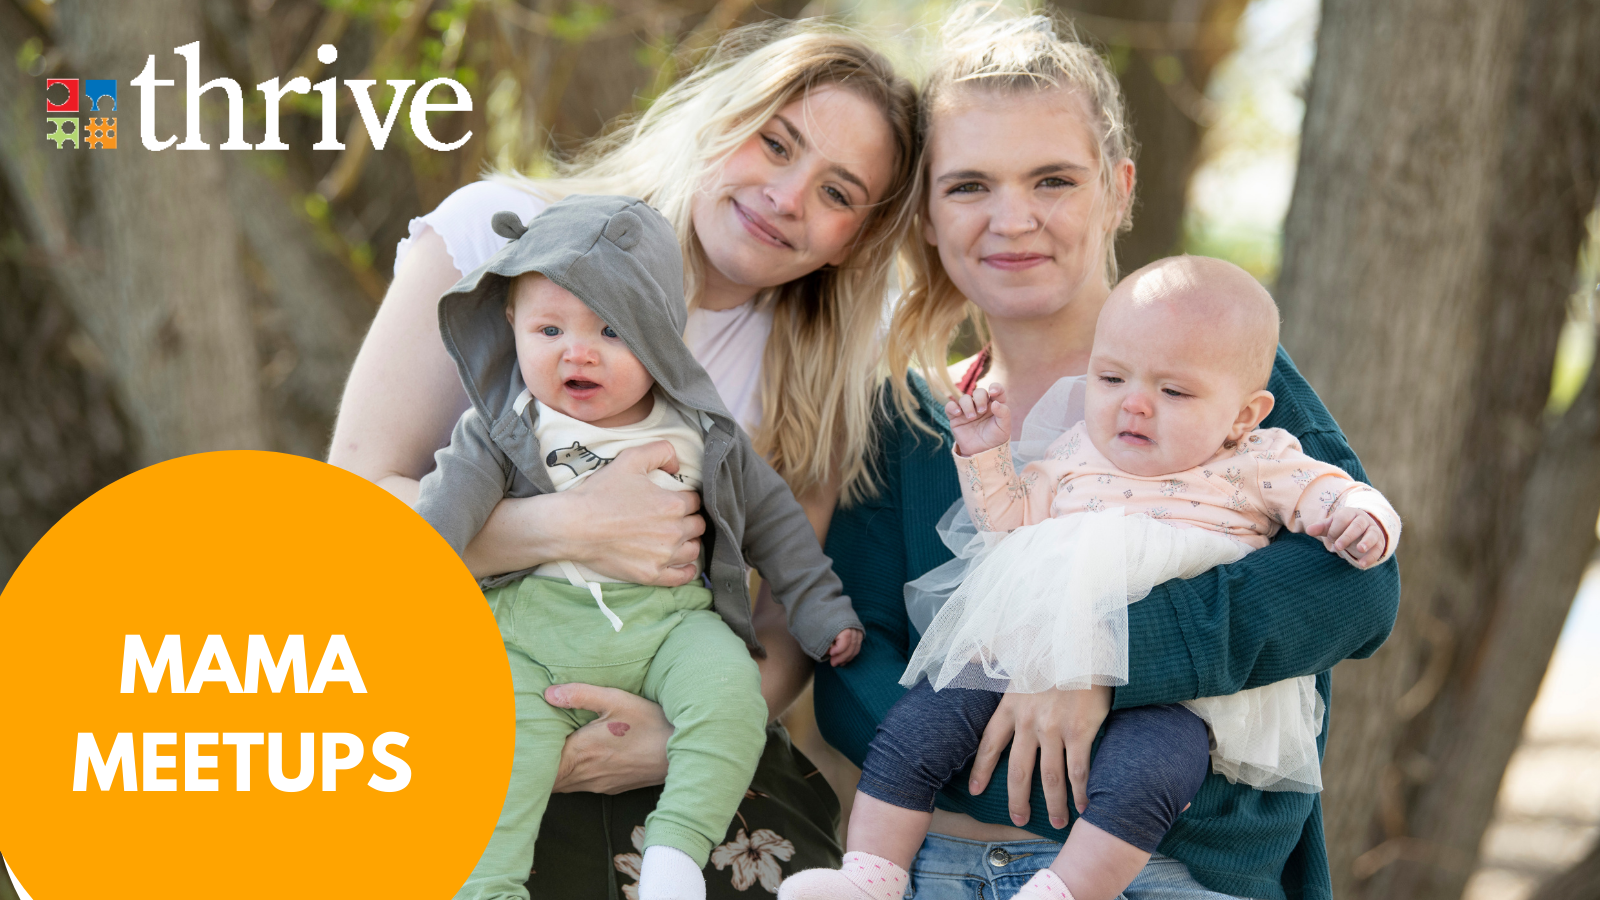 Mama Meetups with Thrive: Two young moms hold their babies